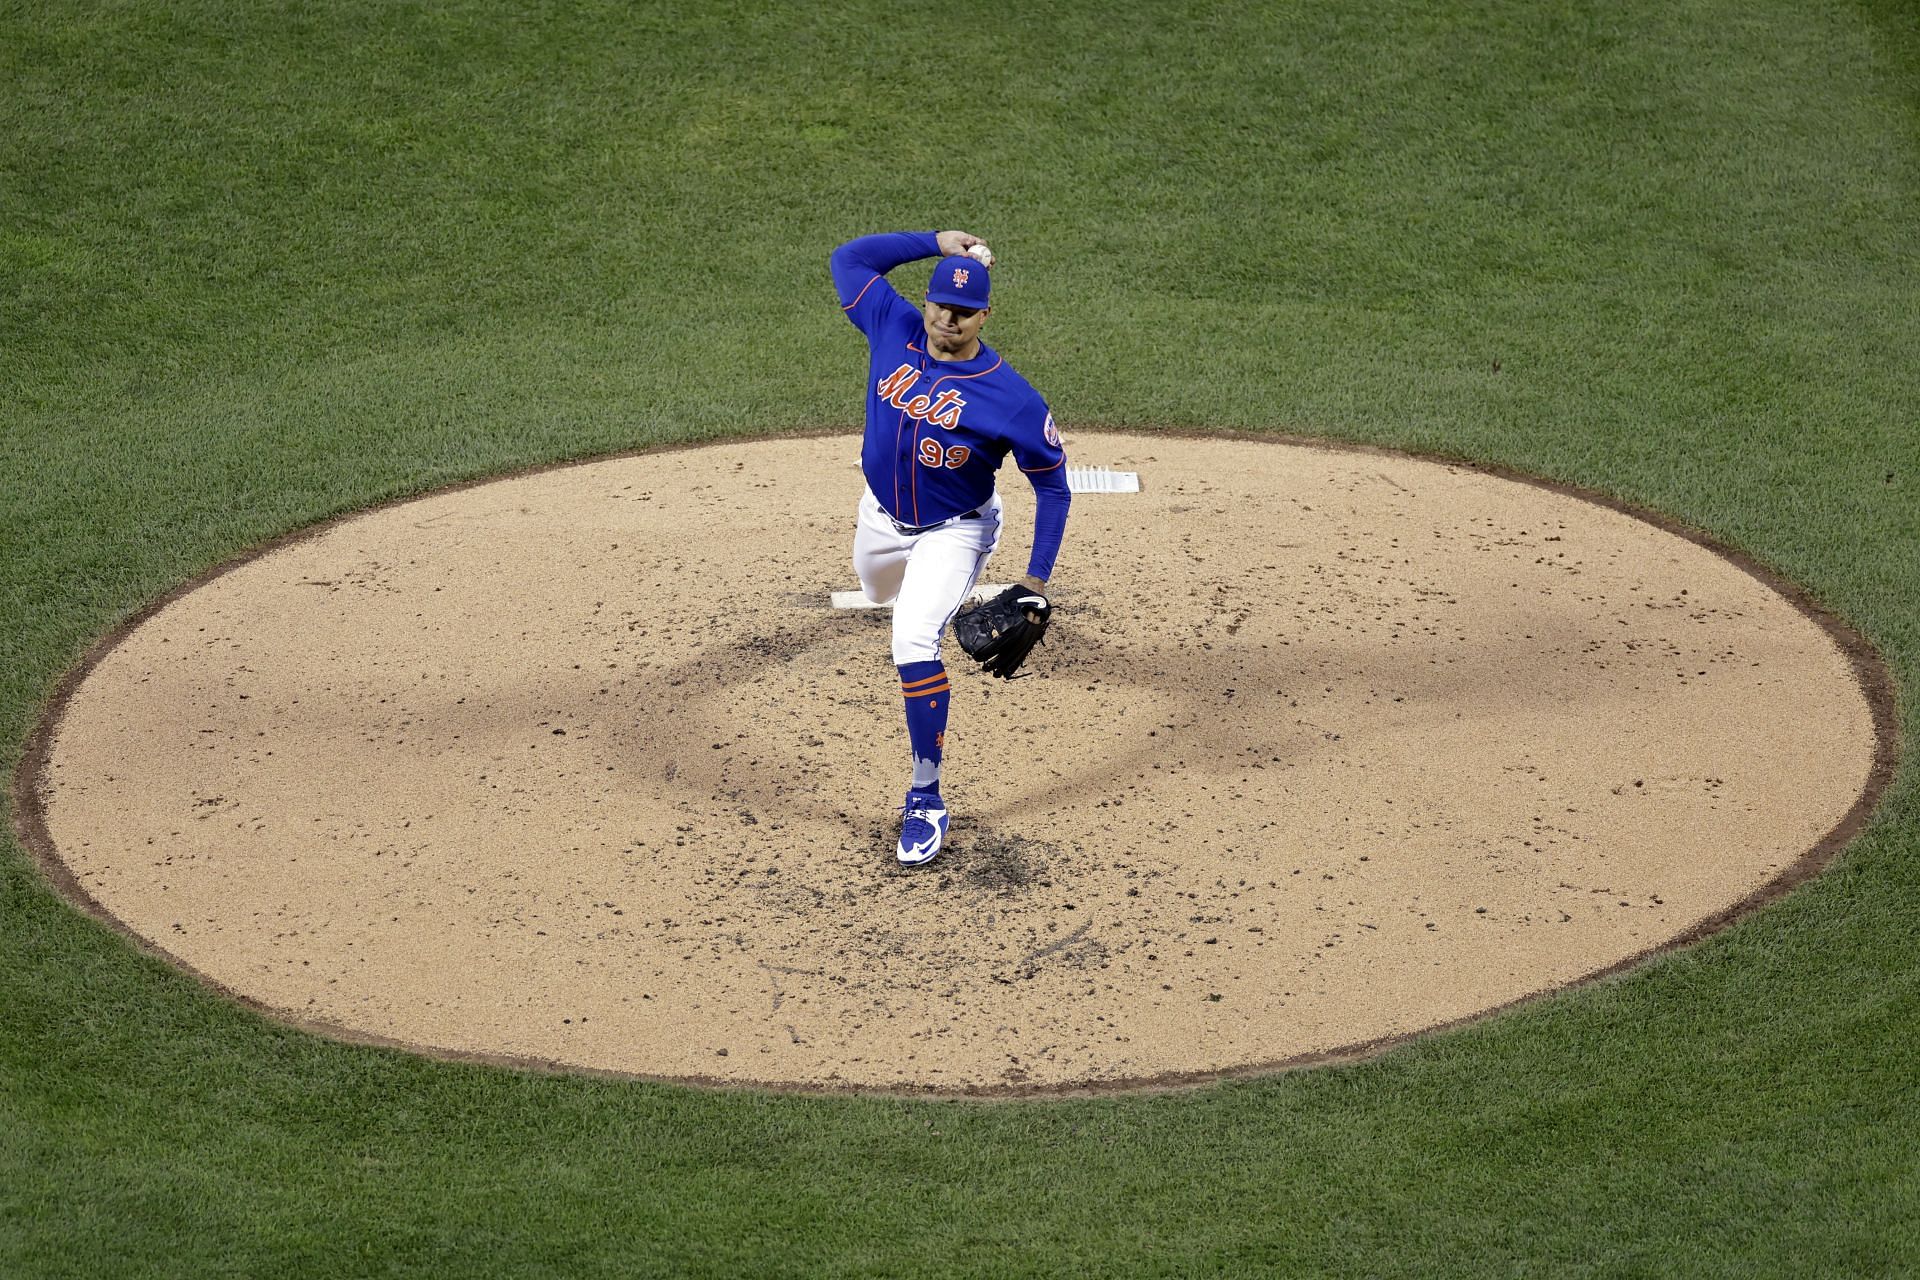 New York Mets' Taijuan Walker during the first inning of a